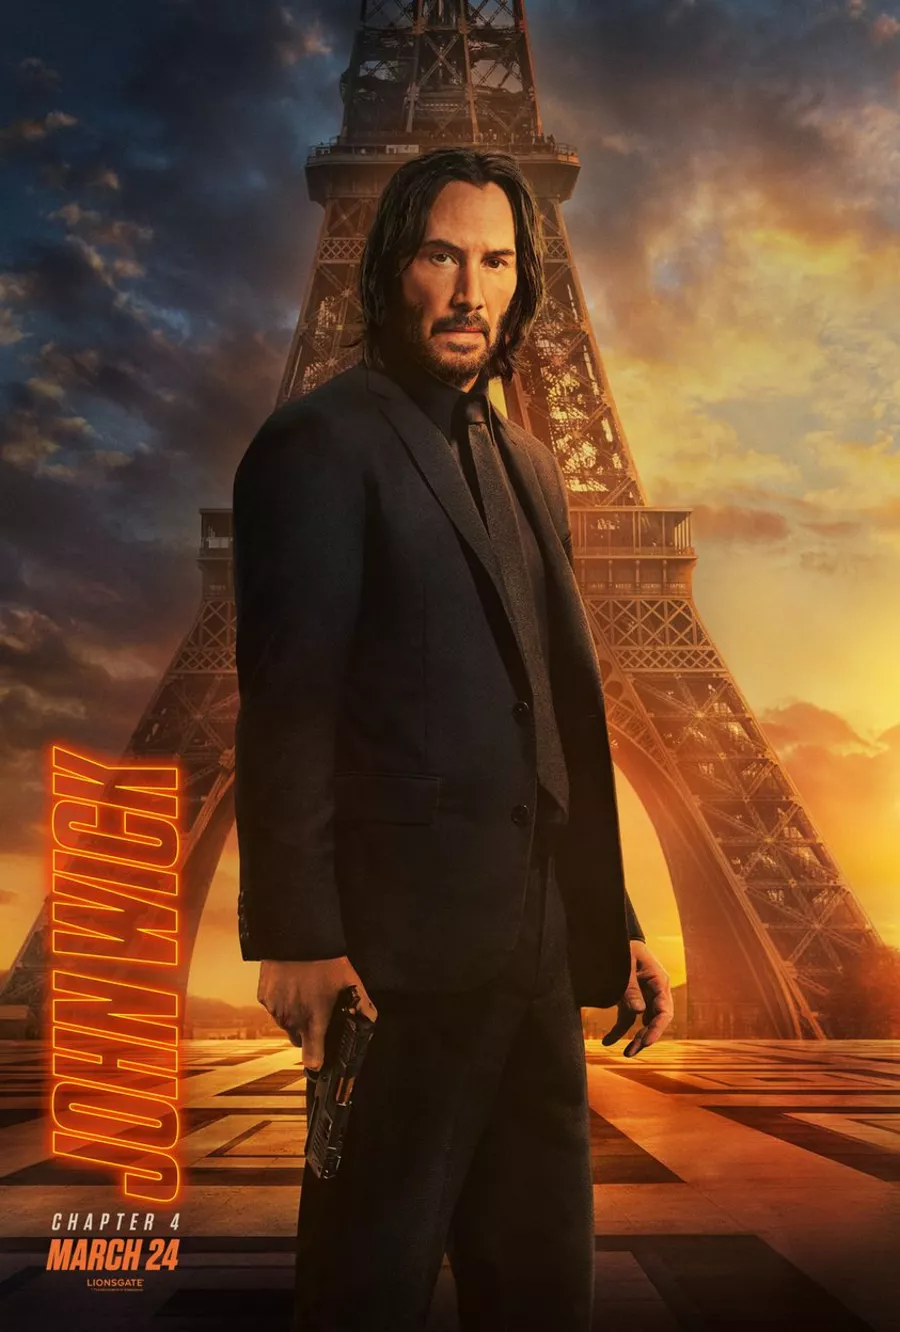 5956 meet the characters of john wick chapter 4 which will premiere on march 23